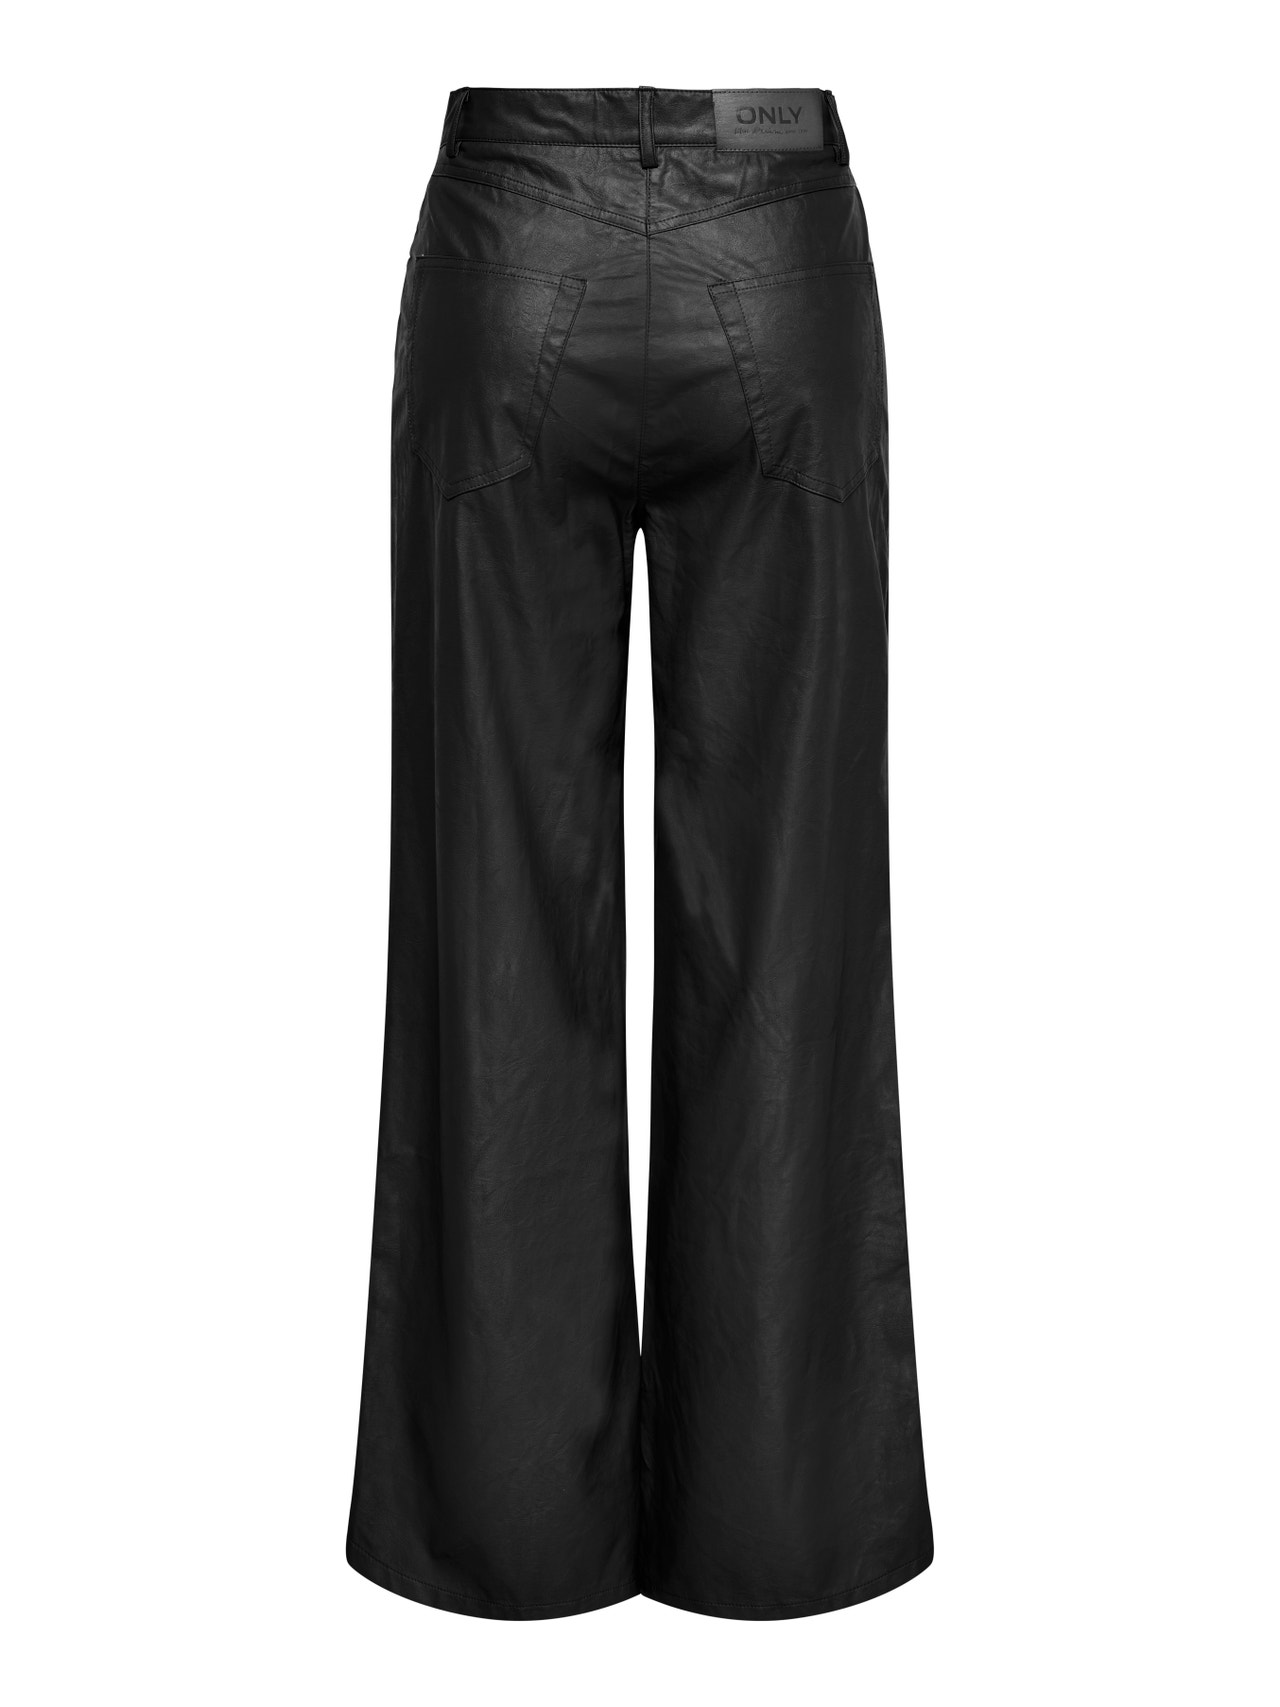 V by Very Faux Leather Elasticated Waist Wide Leg Trousers - Black